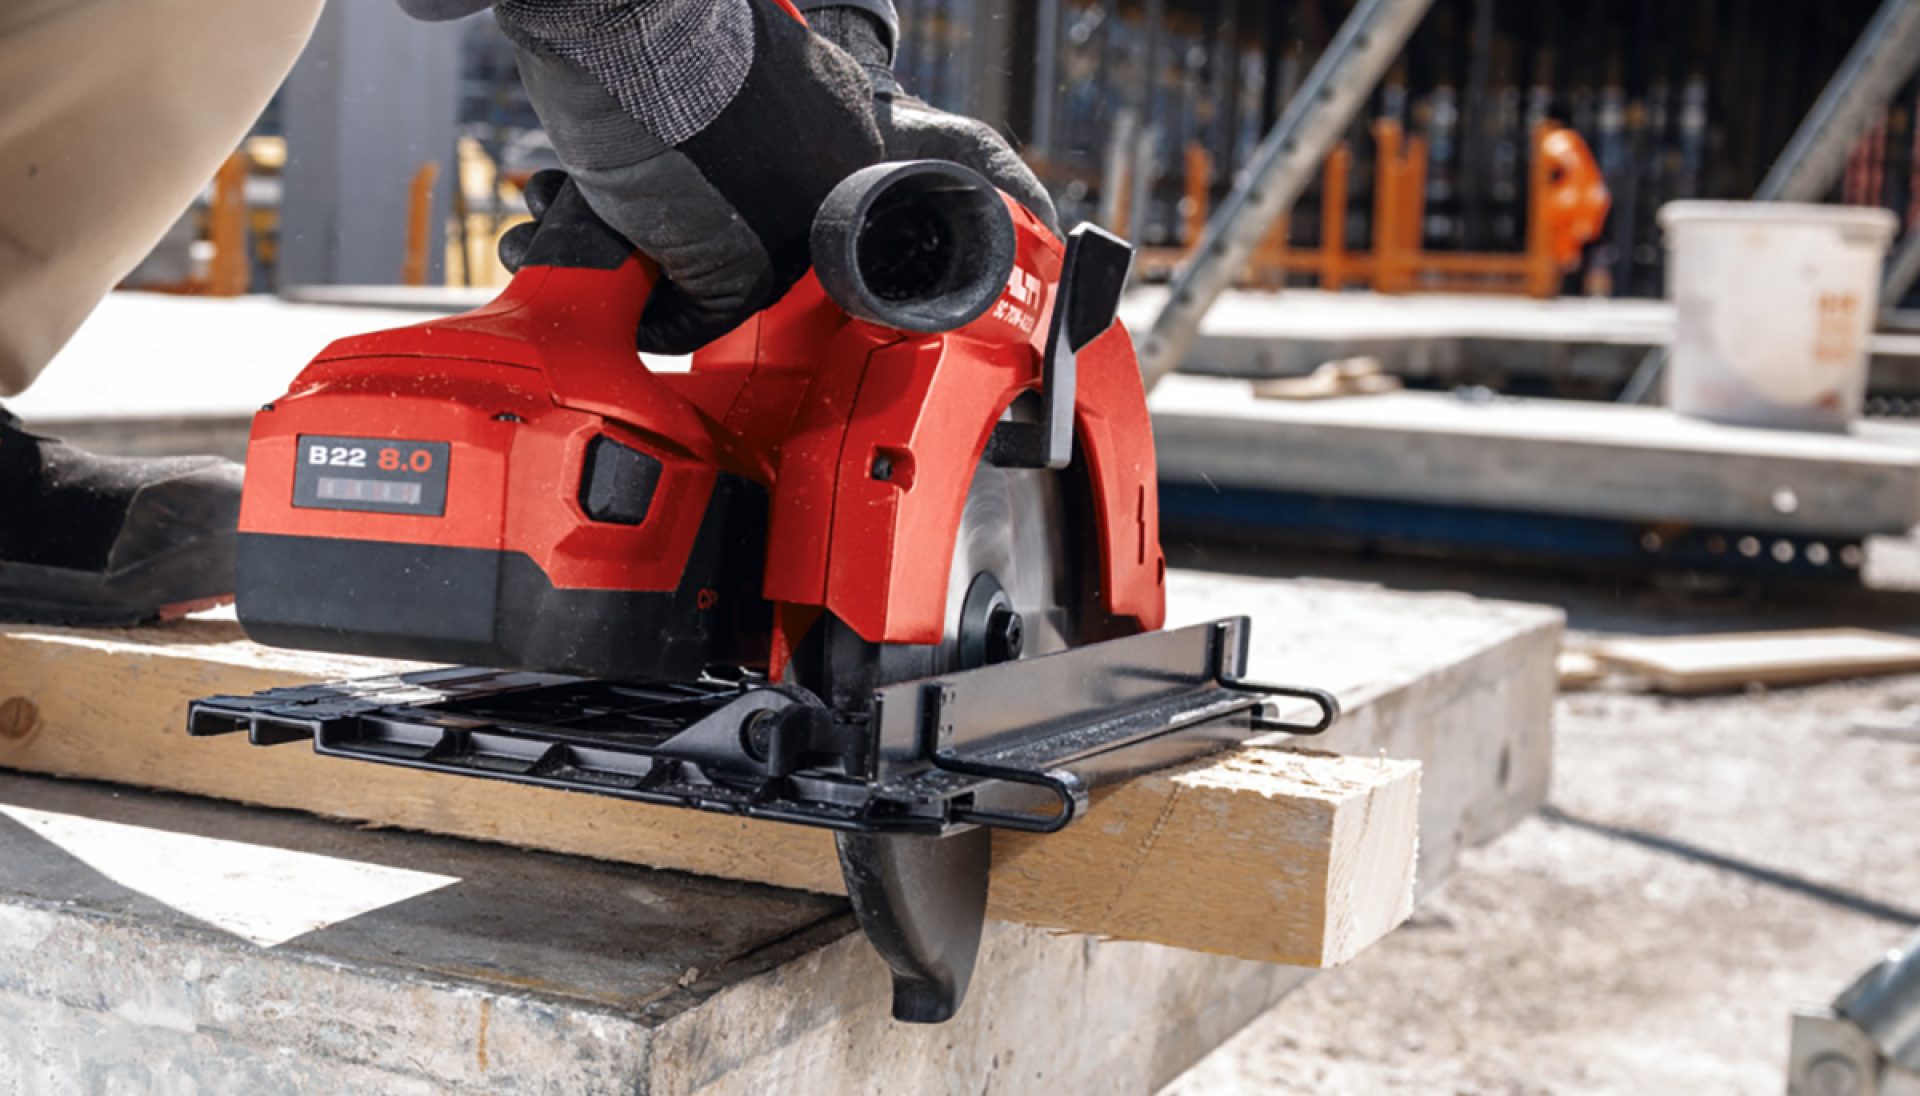 Less time is required for charging with the new B22 batteries from Hilti